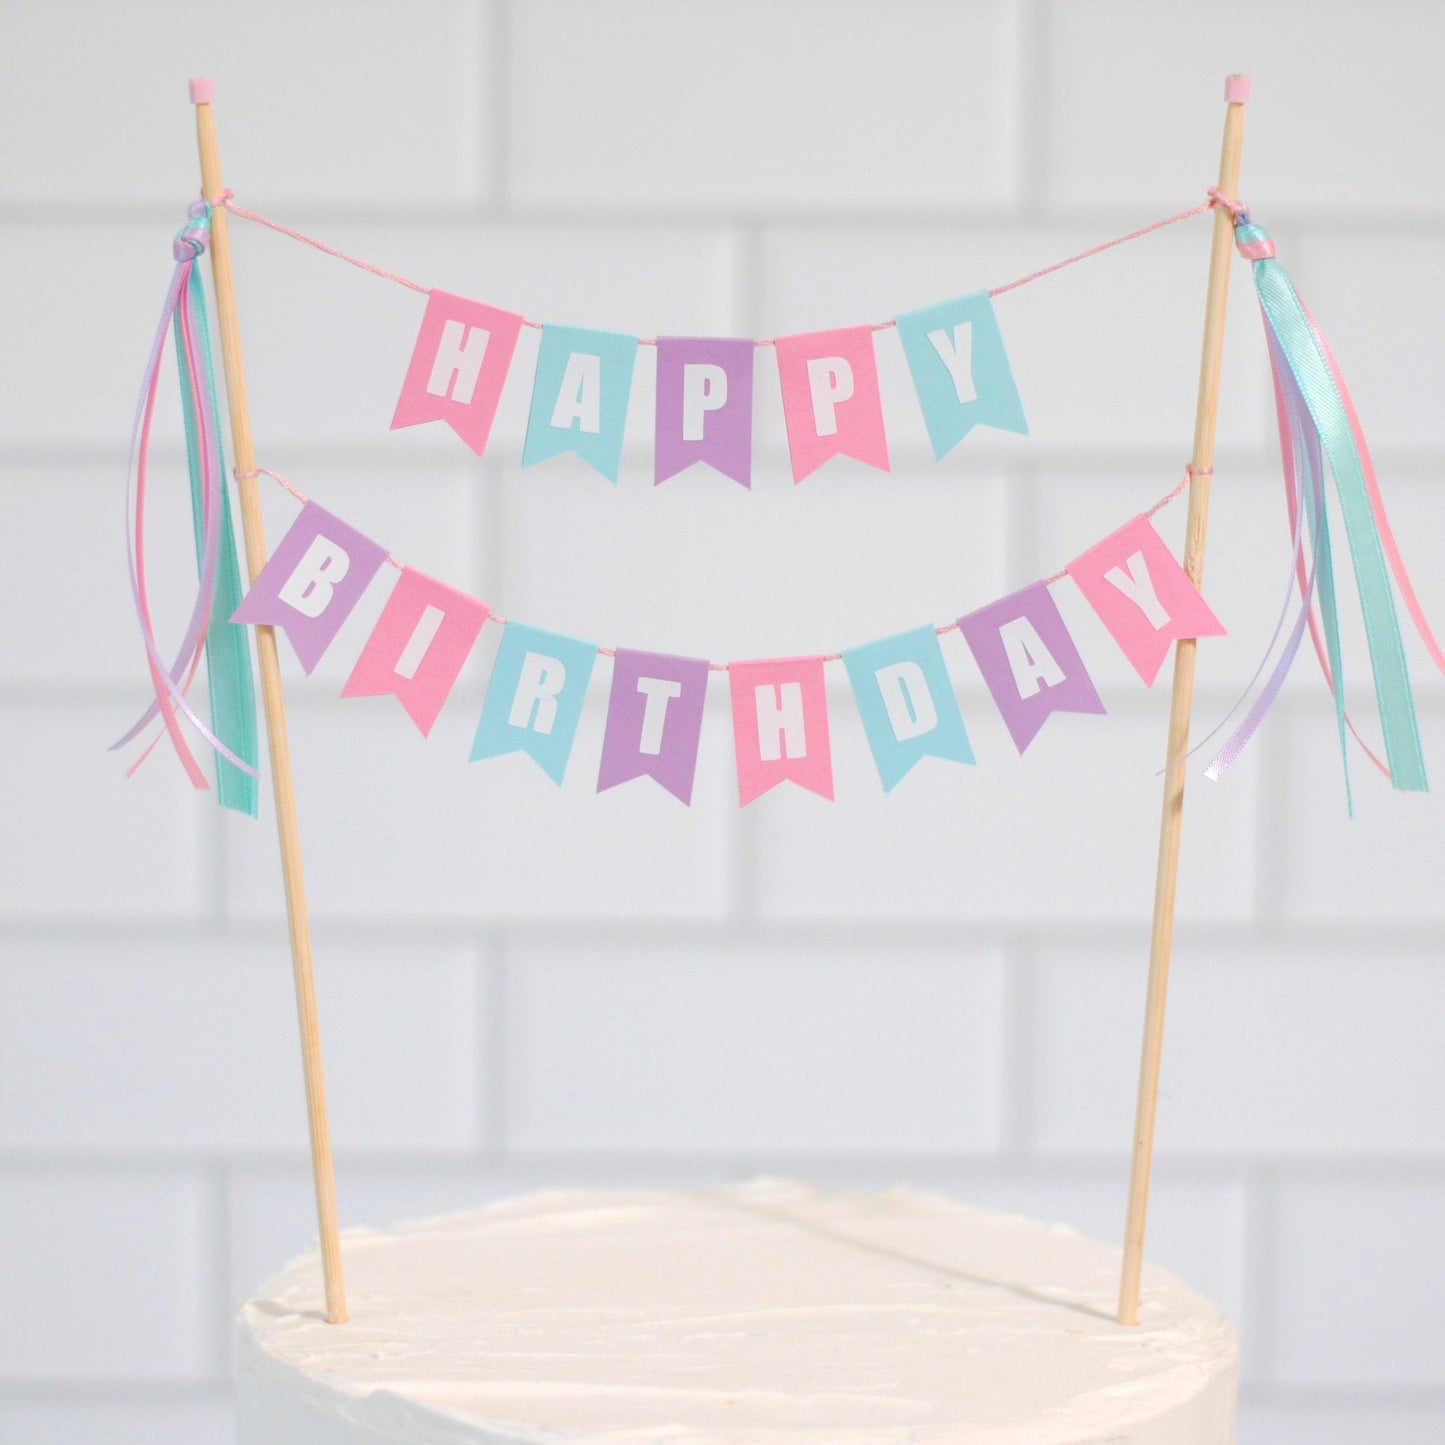 HAPPY BIRTHDAY Cake Topper (Cotton Candy Colors) – Avalon Sunshine